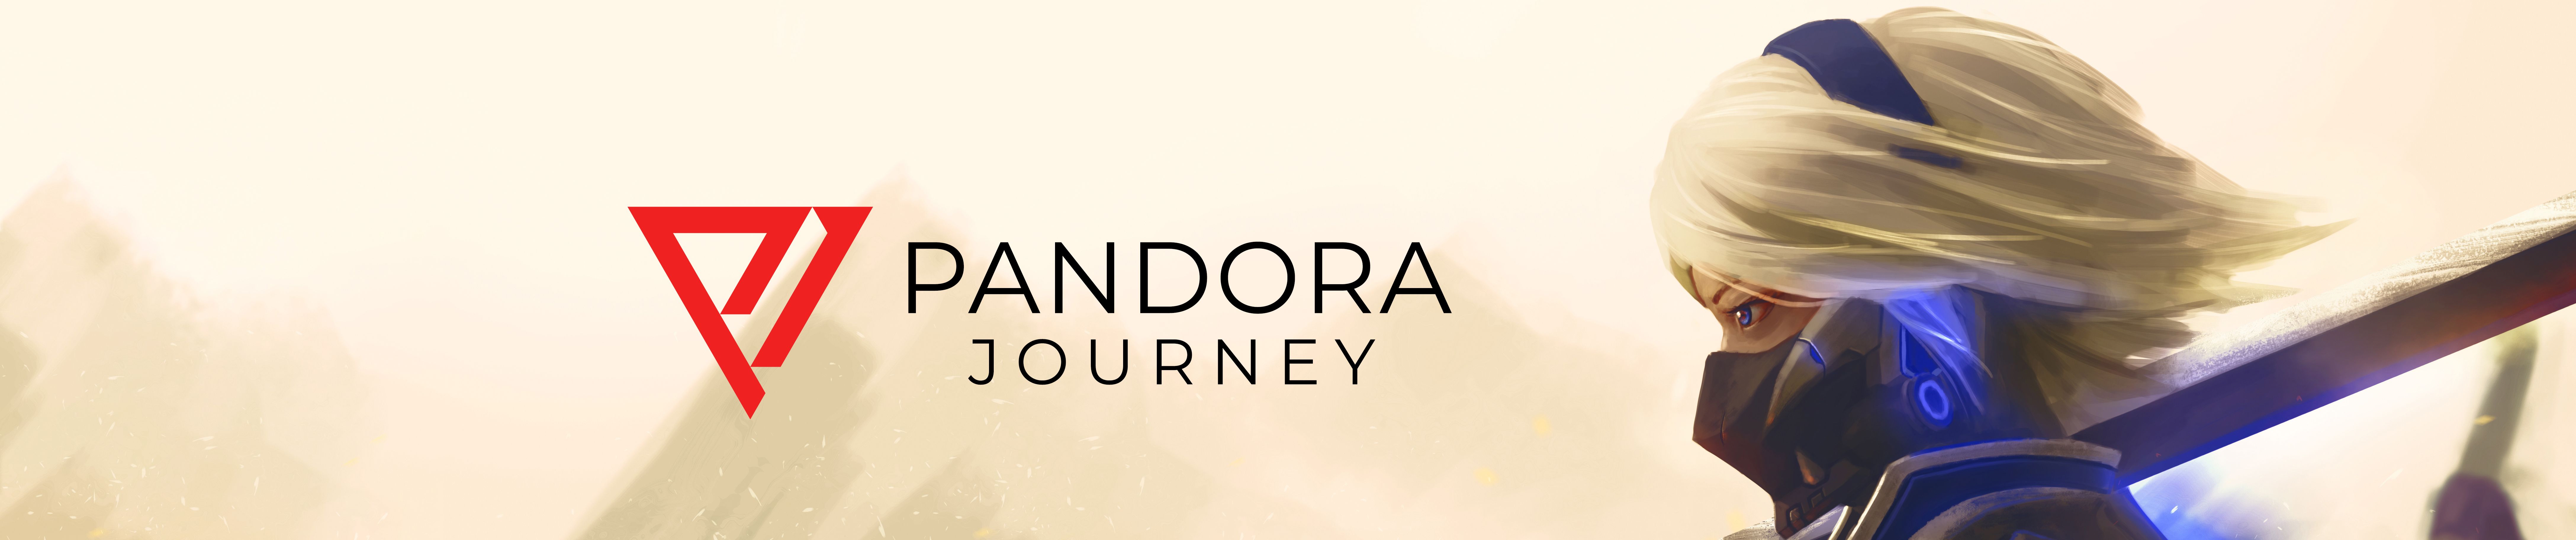 Stream Music - Pandora Journey | Listen to songs, albums, free on SoundCloud